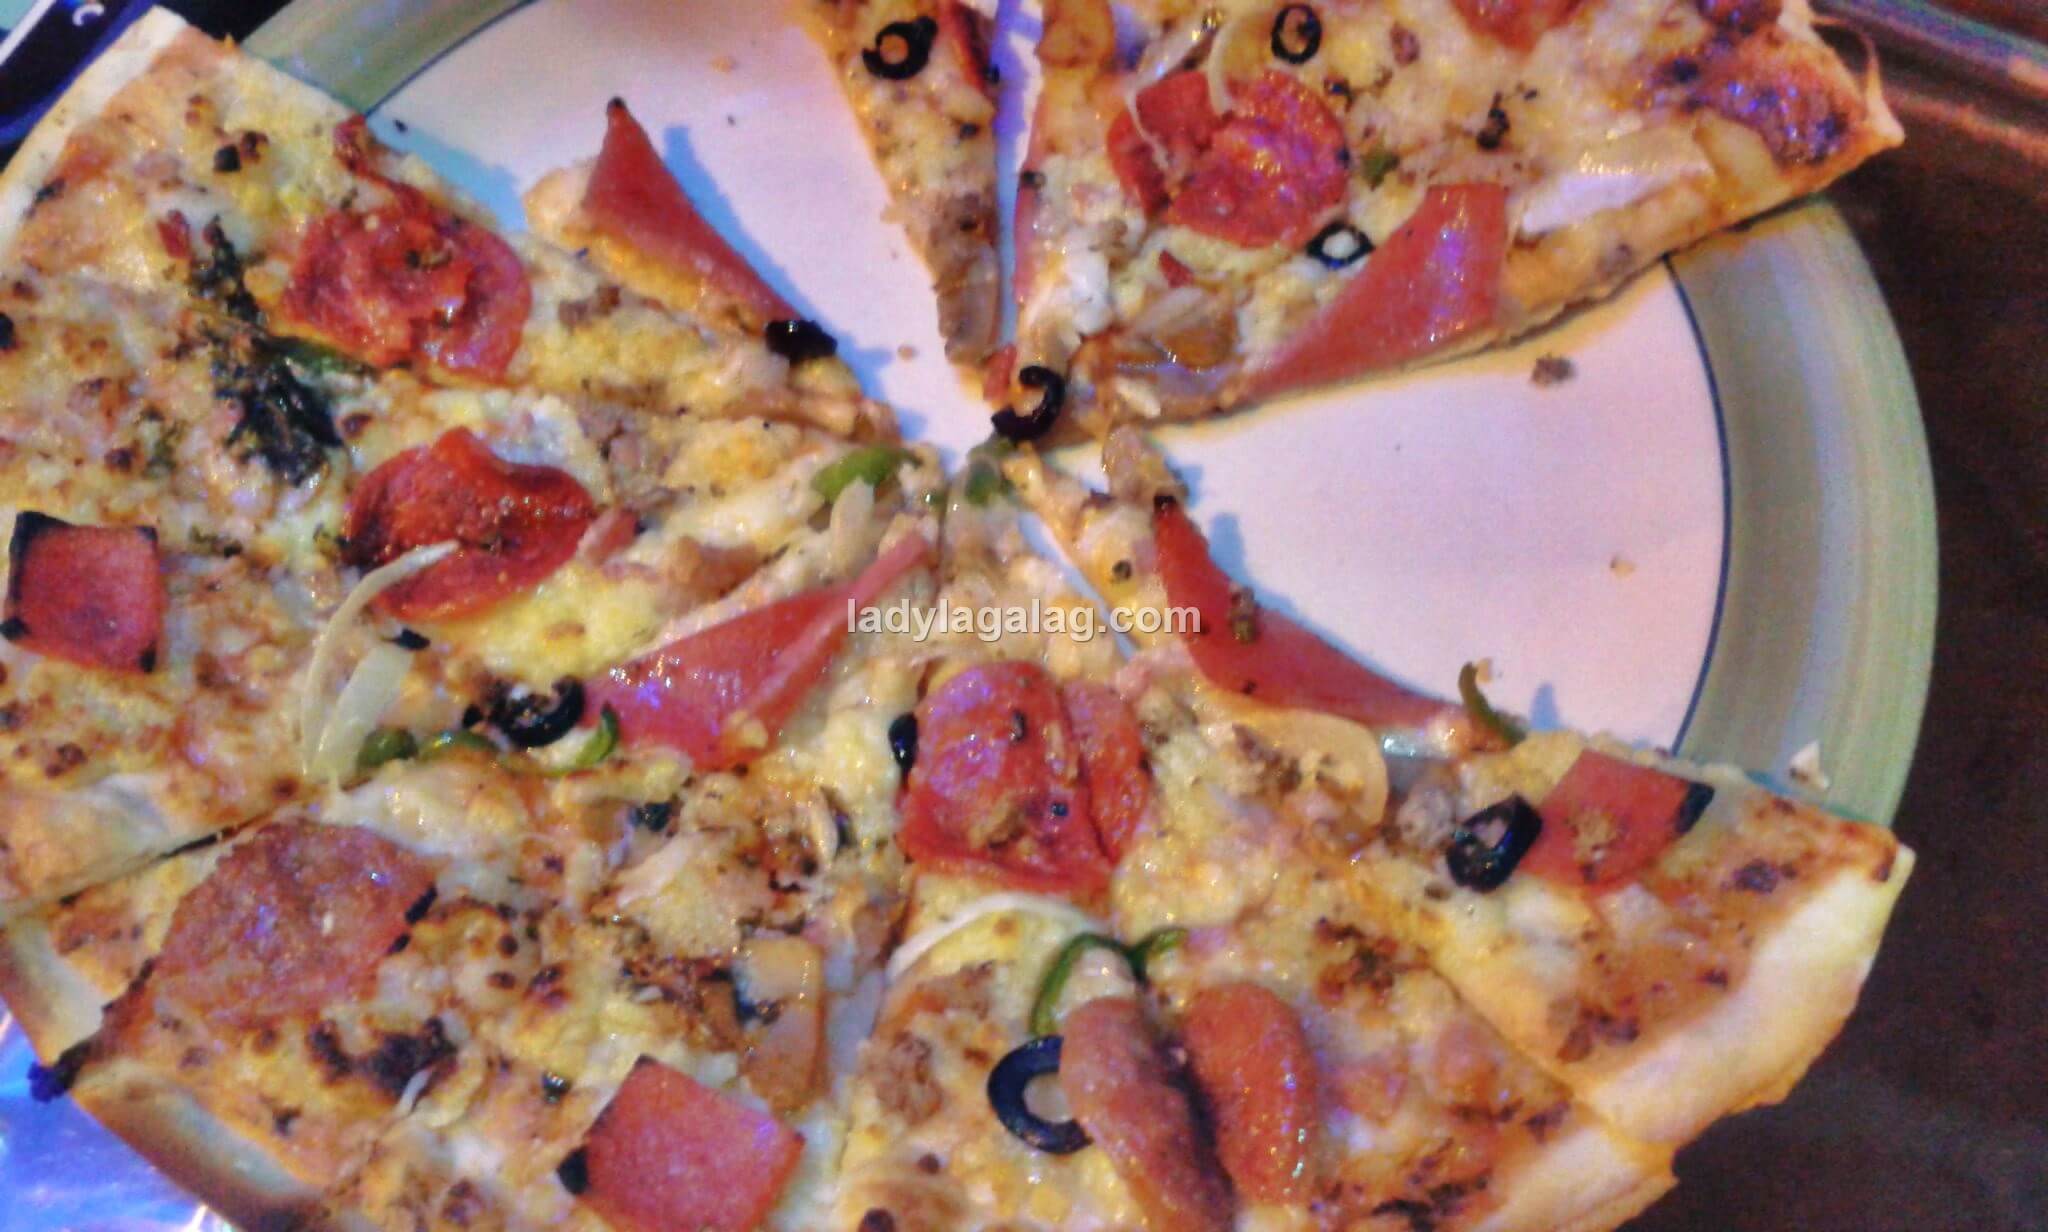 Chef Arnold’ Pizza, a pizza shop in Mandaluyong offers thin crust